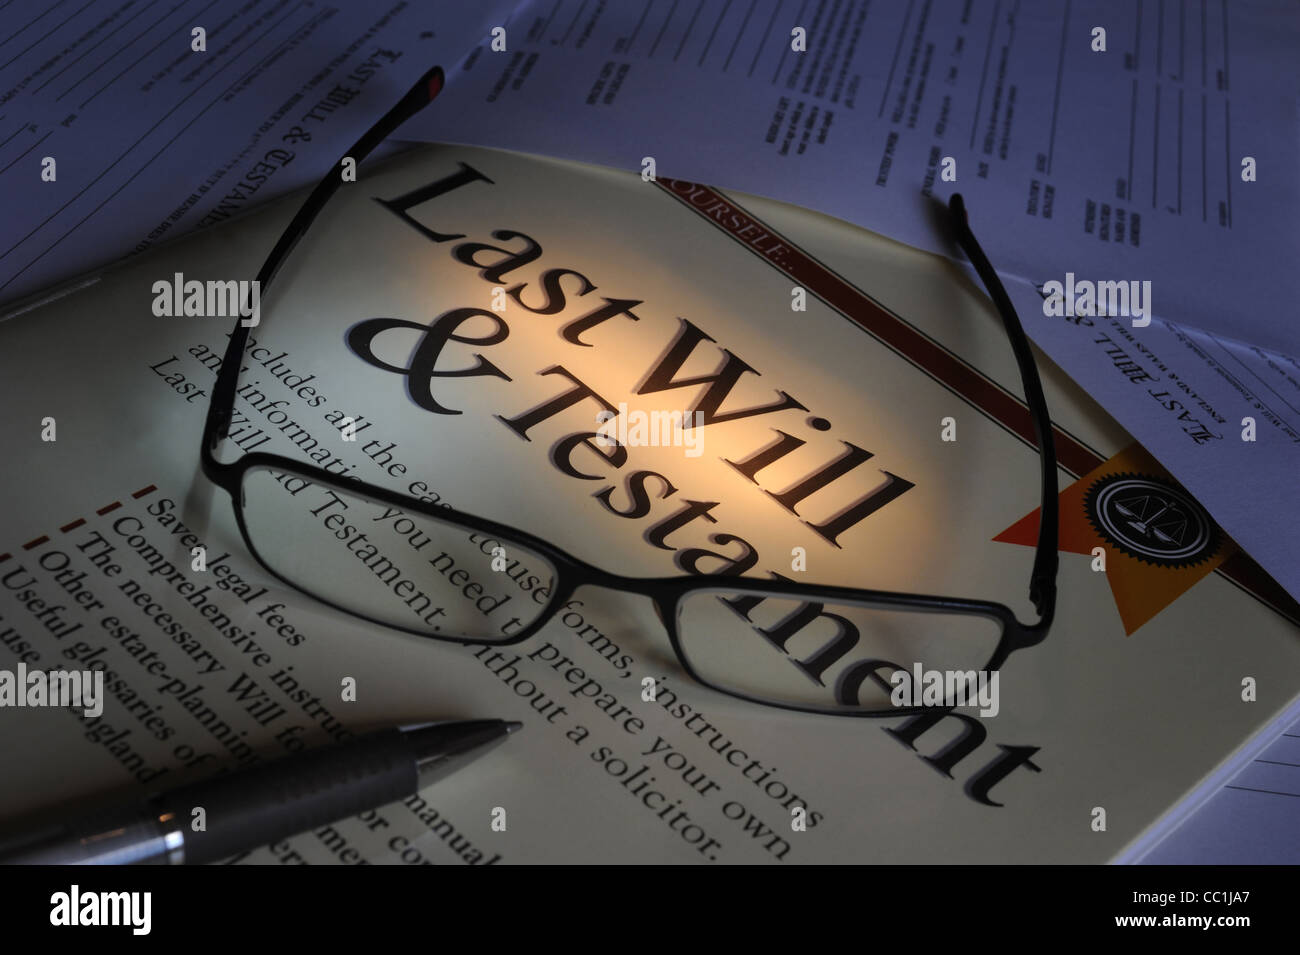 LAST WILL AND TESTAMENT FORMS WITH SPECTACLES RE MAKING A WILL FUTURE SAVINGS INHERITANCE TAX FAMILY DEATH LEGACY DONATION UK Stock Photo